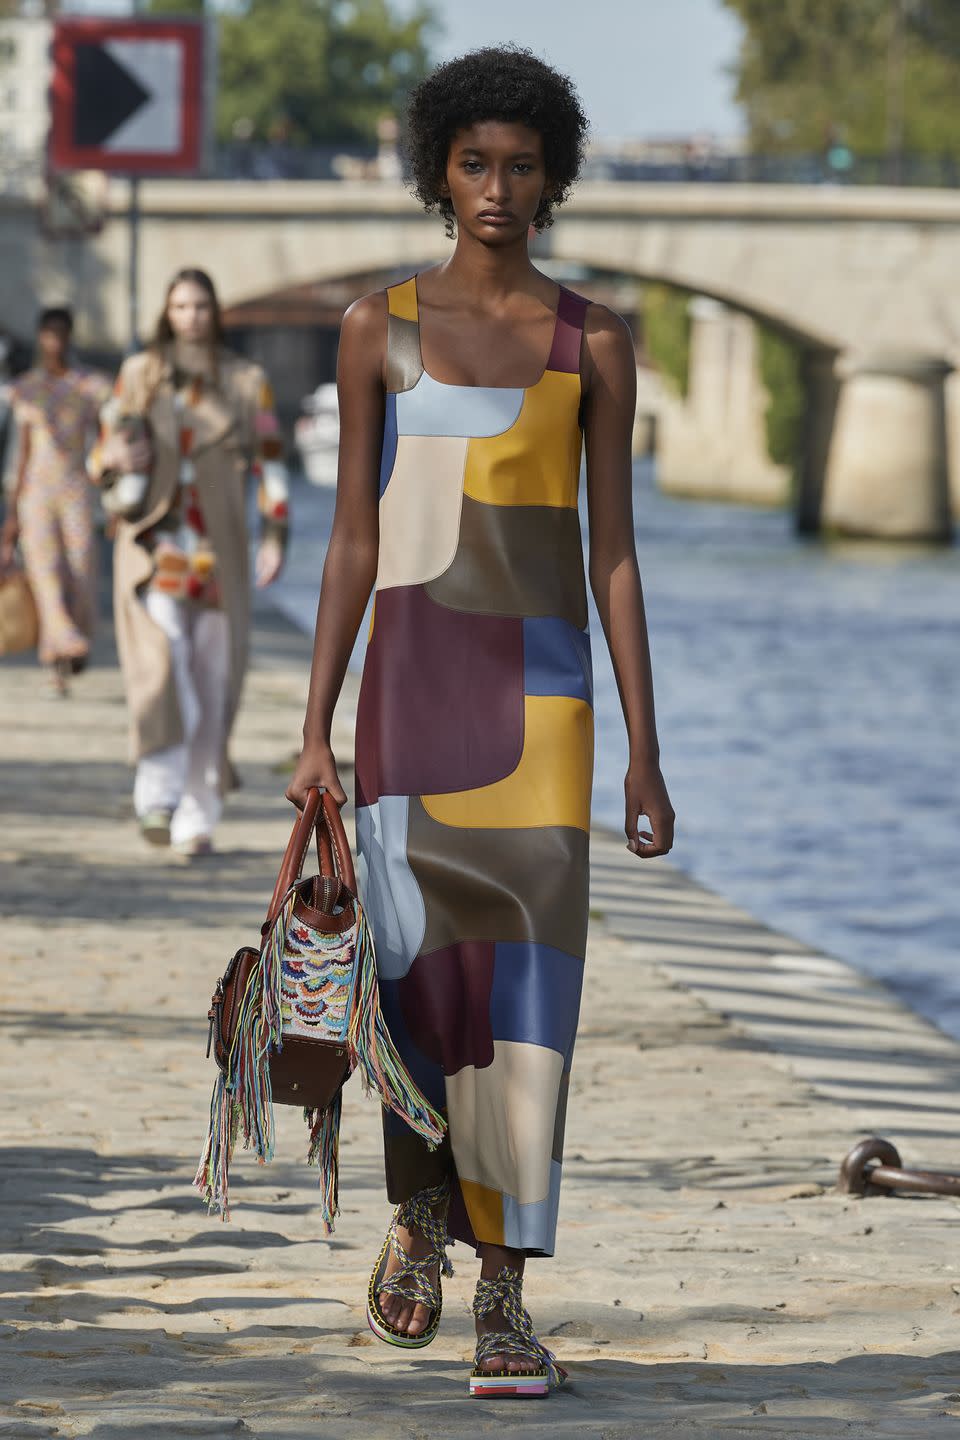 <p>Leading the show notes for Chloé's spring/summer 2022 collection was a quote from Aldous Huxley about love.</p><p>"Of all the worn, smudged, dog-eared words in our vocabulary, 'love' is surely the grubbiest, smelliest, slimiest. Bawled from a<br>million pulpits, lasciviously crooned through hundreds of millions of loudspeakers, it has become an outrage to good taste and decent<br>feeling, an obscenity which one hesitates to pronounce. And yet it has to be pronounced; for, after all, Love is the last word."</p><p>As well as the concept of love inspiring the collection was a celebration of craft, where it is expanding the number of our products handcrafted by independent artisans. </p><p>"We are embossing all of these products with a signature spiral<br>symbol. Chloé Craft seeks to pioneer new levels of traceability and transparency in the industry and establish a deeper connection between consumers and local producers. These techniques cannot be mimicked by machinery, only mastered by the human hand."</p>